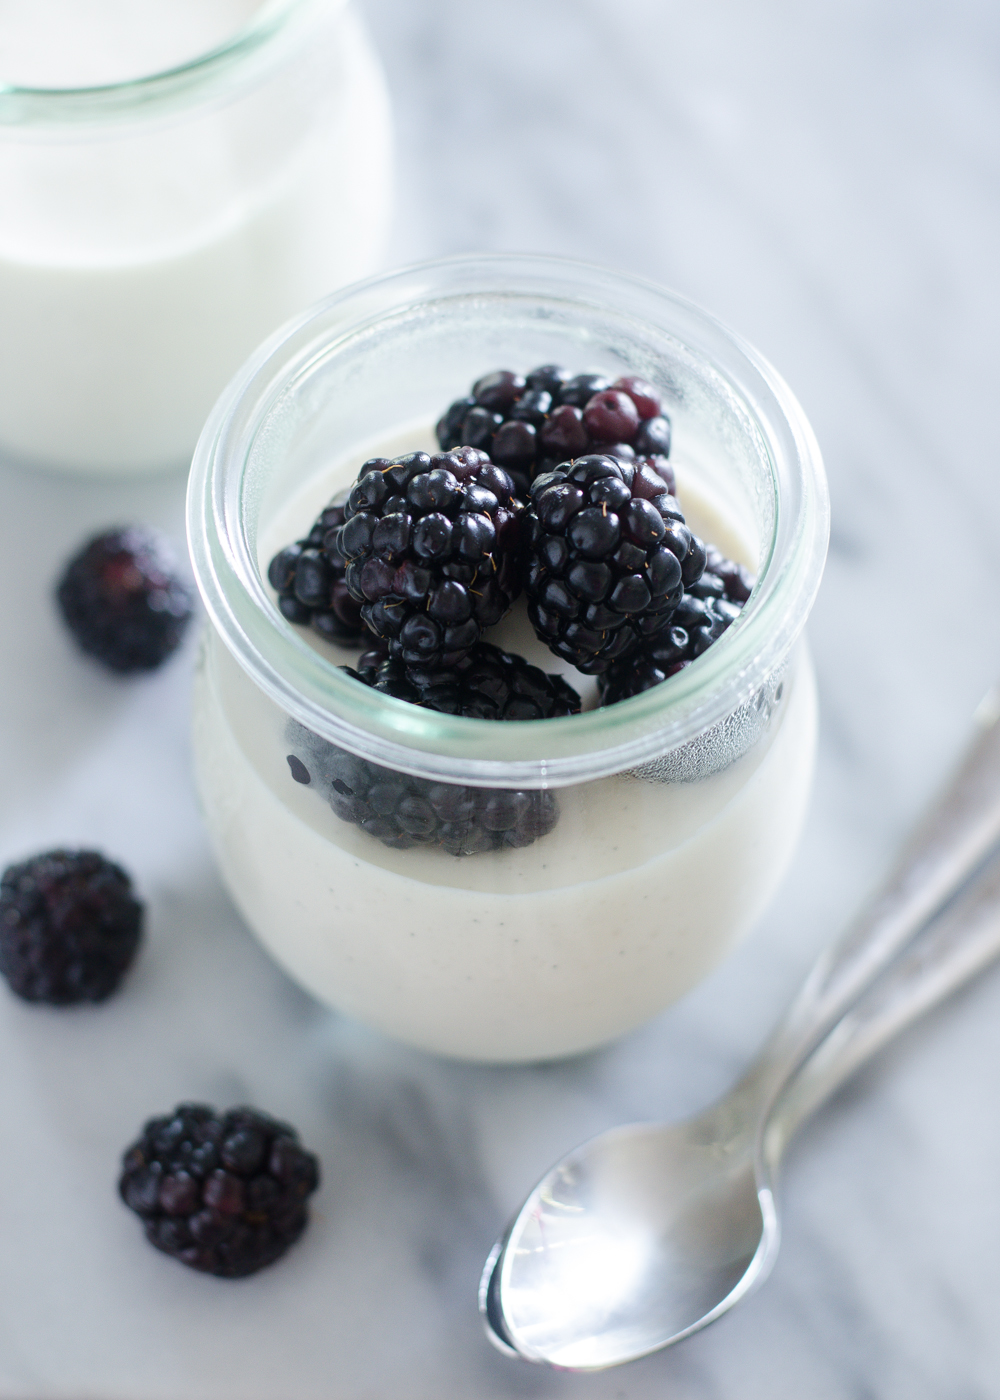 Russian Cream (or Sour Cream Panna Cotta) -- a slightly tangy, delightfully creamy dessert. It's stupidly easy to make.